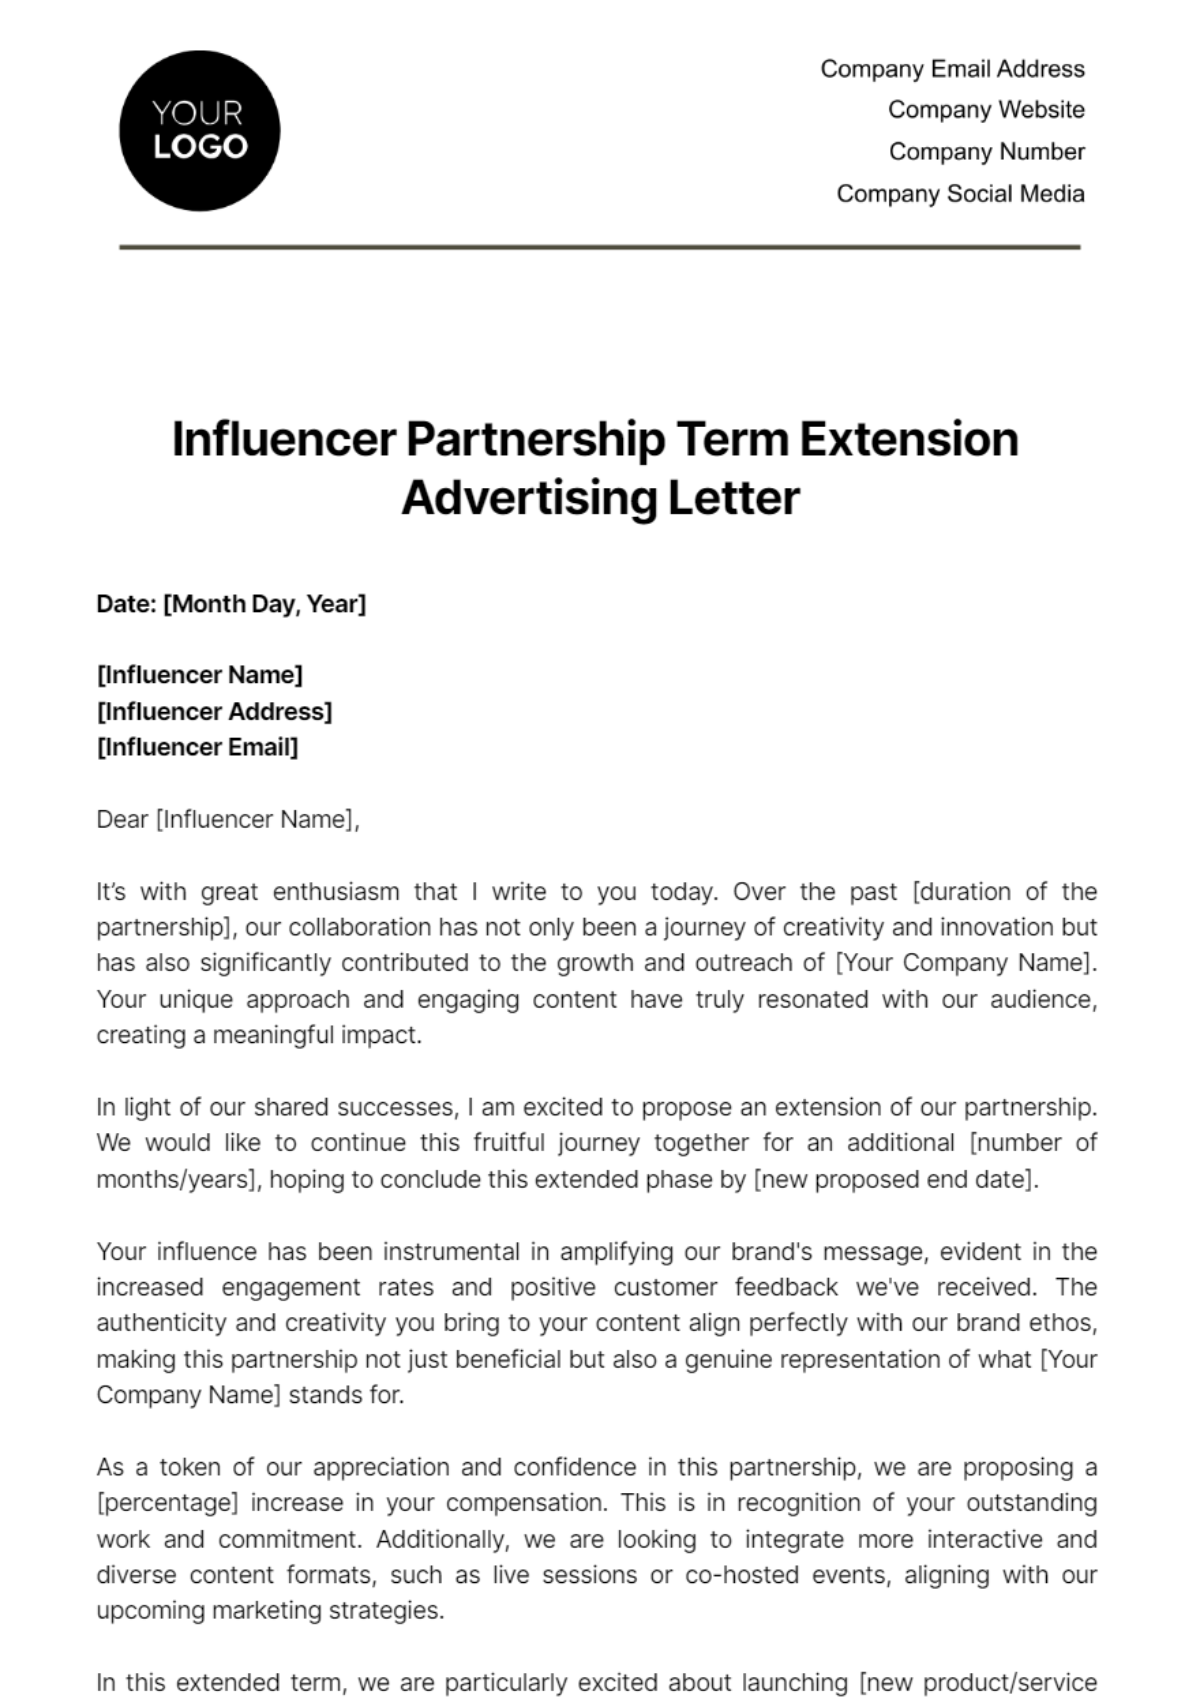 Influencer Partnership Term Extension Advertising Letter Template